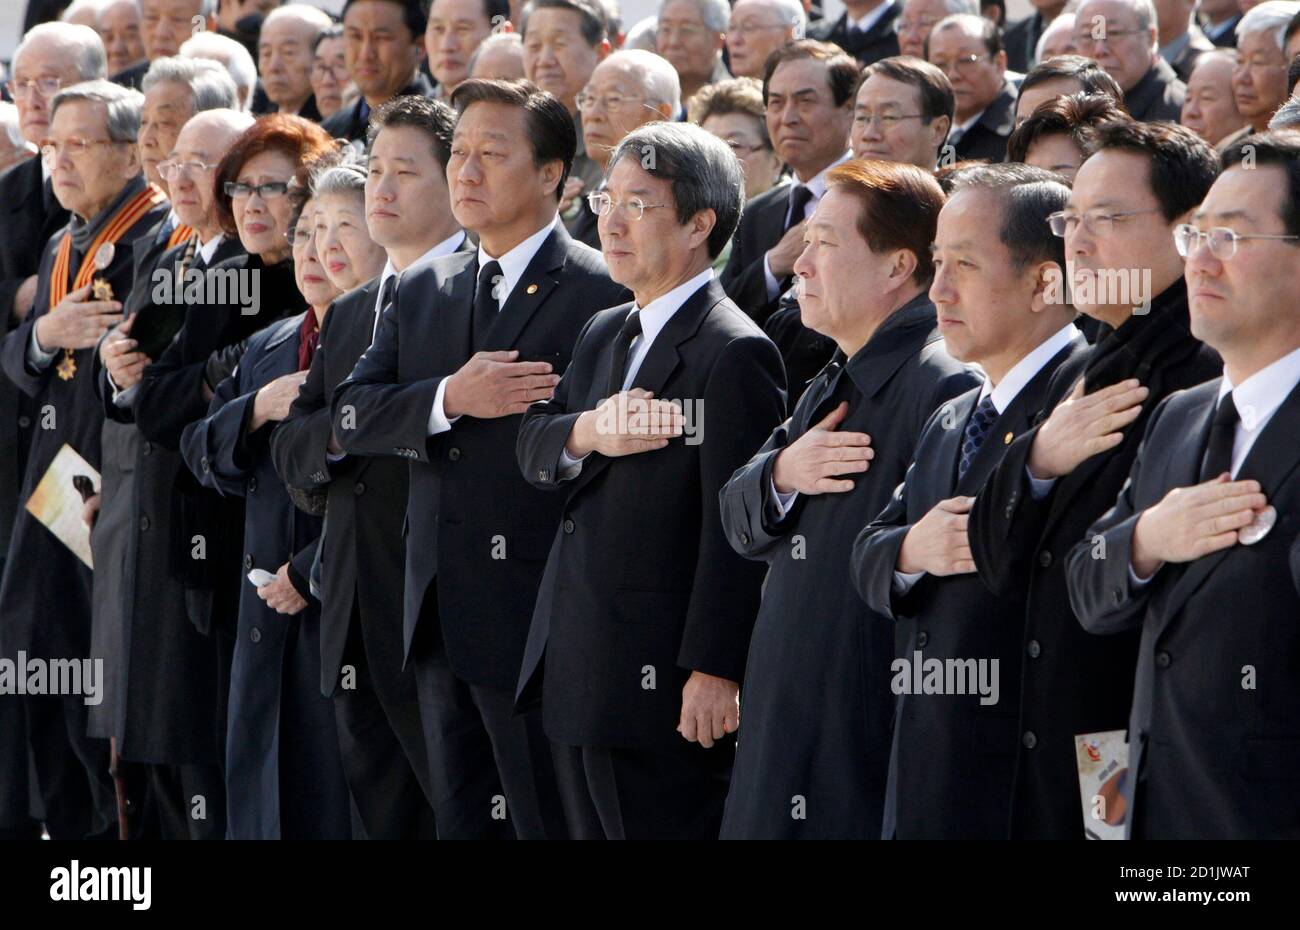 South Korean Prime Minister Chung Un-chan (5th R, front row), government officials and citizens salute the national flag during a ceremony at the Seoul City Hall Plaza March 26, 2010, to commemorate the 100th anniversary of Japan's execution of Korean independence fighter Ahn Jung-geun. Ahn was the man who shot to death Hirobumi Ito, the first Japanese Resident General of Korea, in China's northeastern city of Harbin in October 1909. Japan had forcibly occupied and colonized the Korean peninsula in 1910-1945.     REUTERS/Jo Yong-Hak (SOUTH KOREA - Tags: ANNIVERSARY POLITICS) Stock Photo